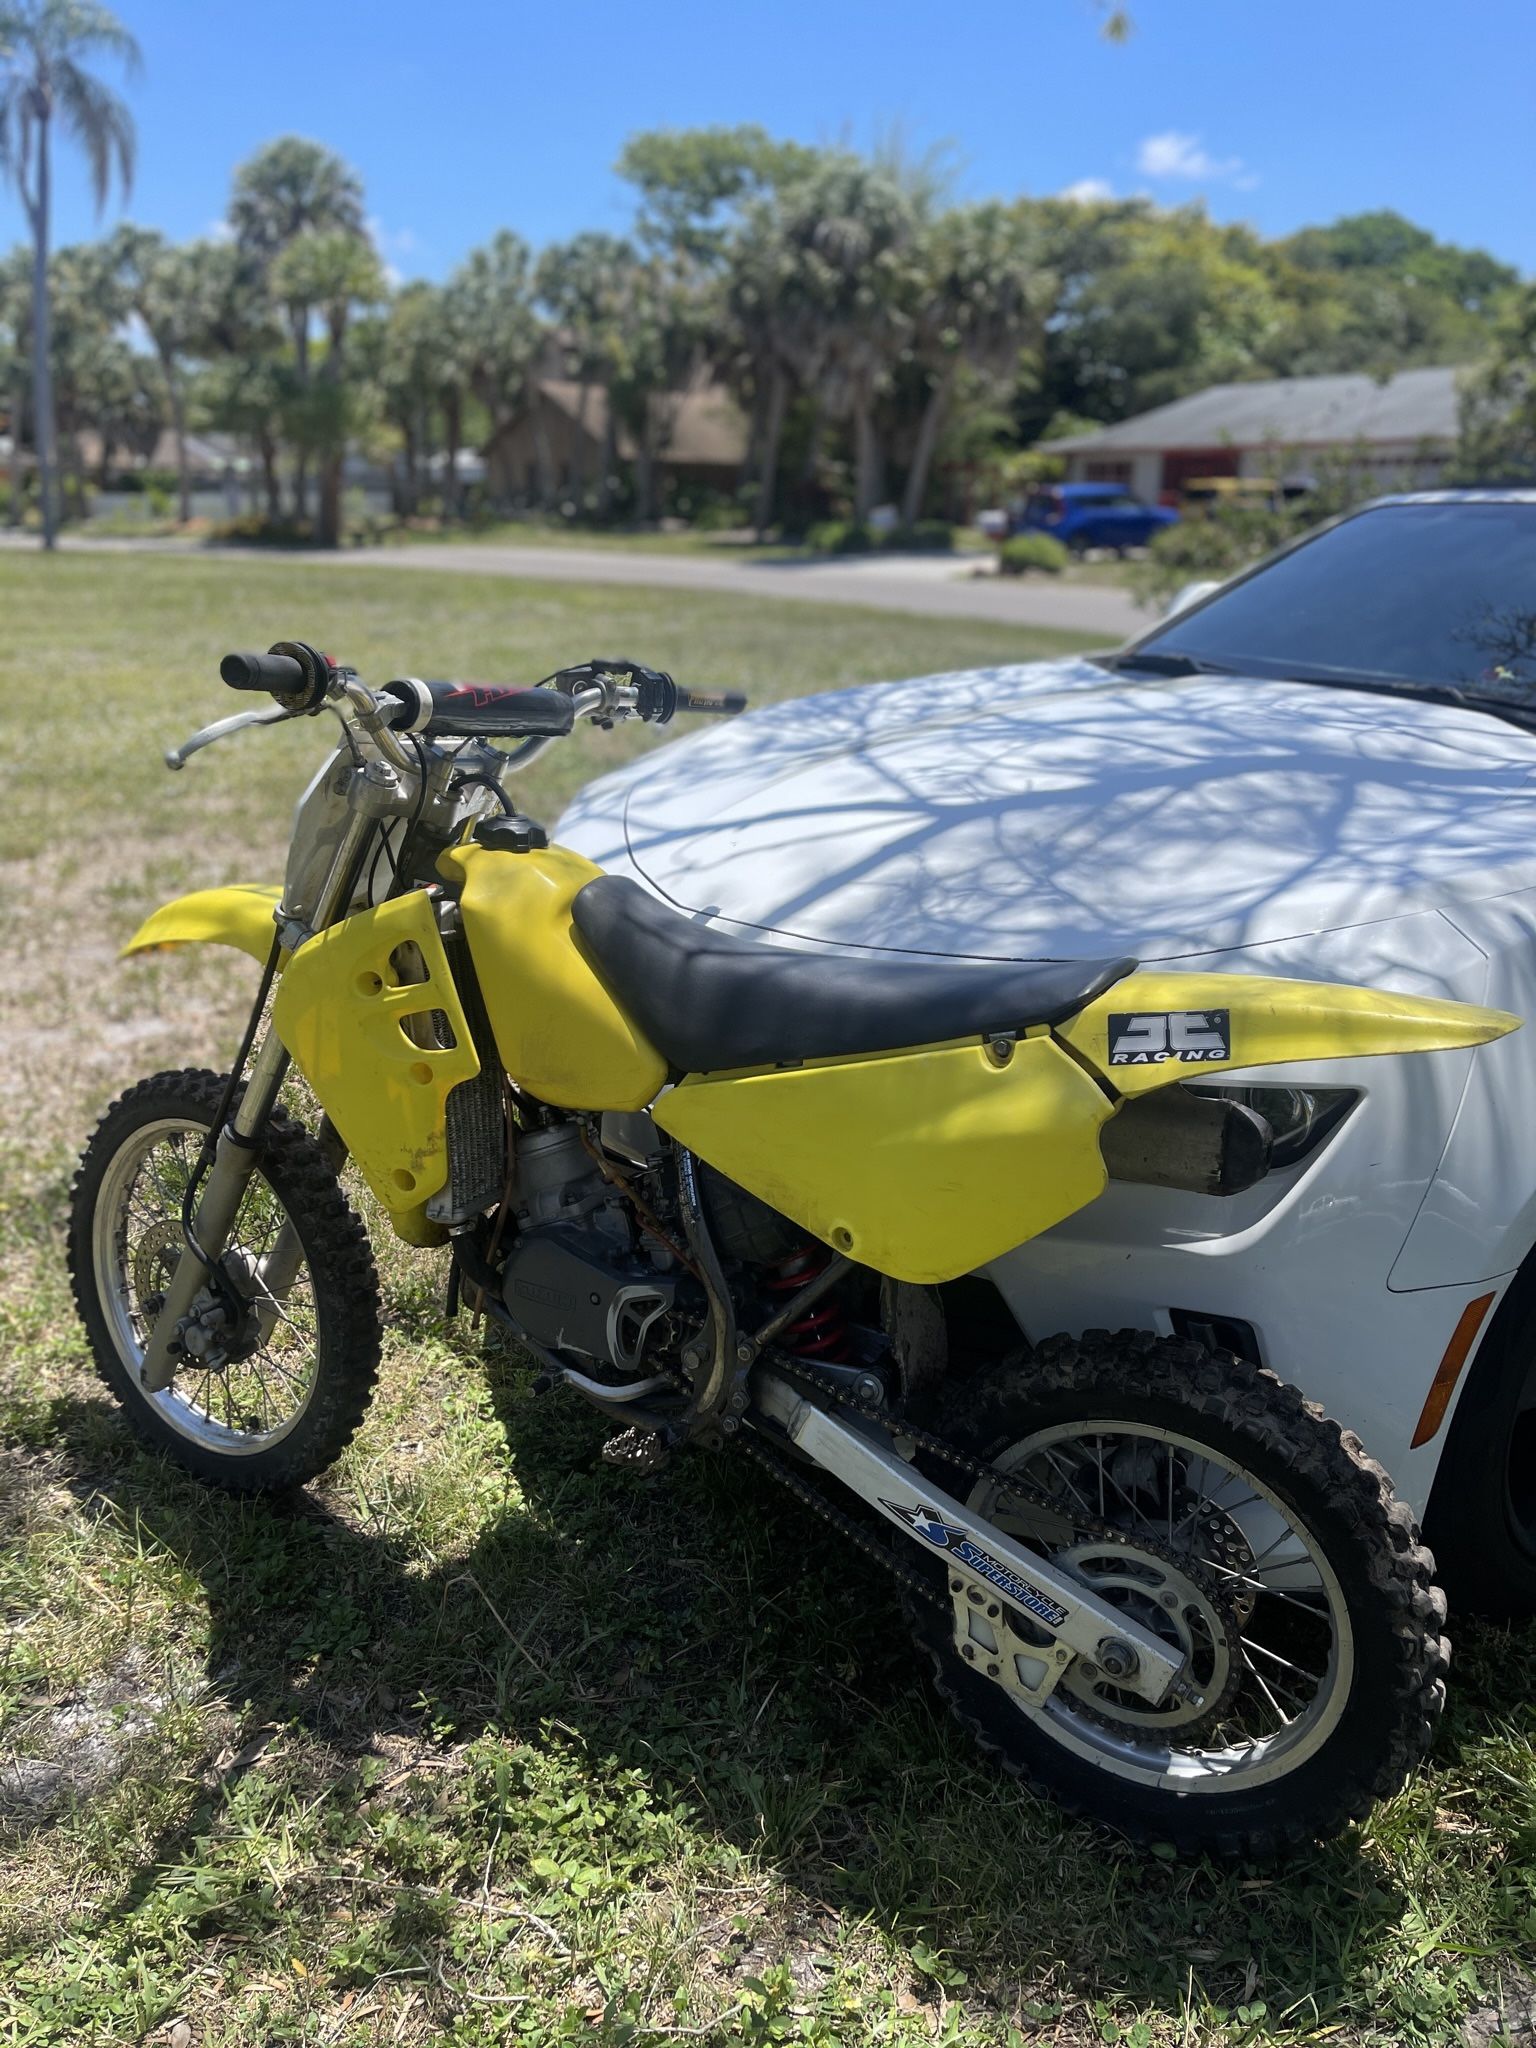 2005 Rm 85, Runs Perfectly Fine! Starts First Kick. Ready To Ride!!